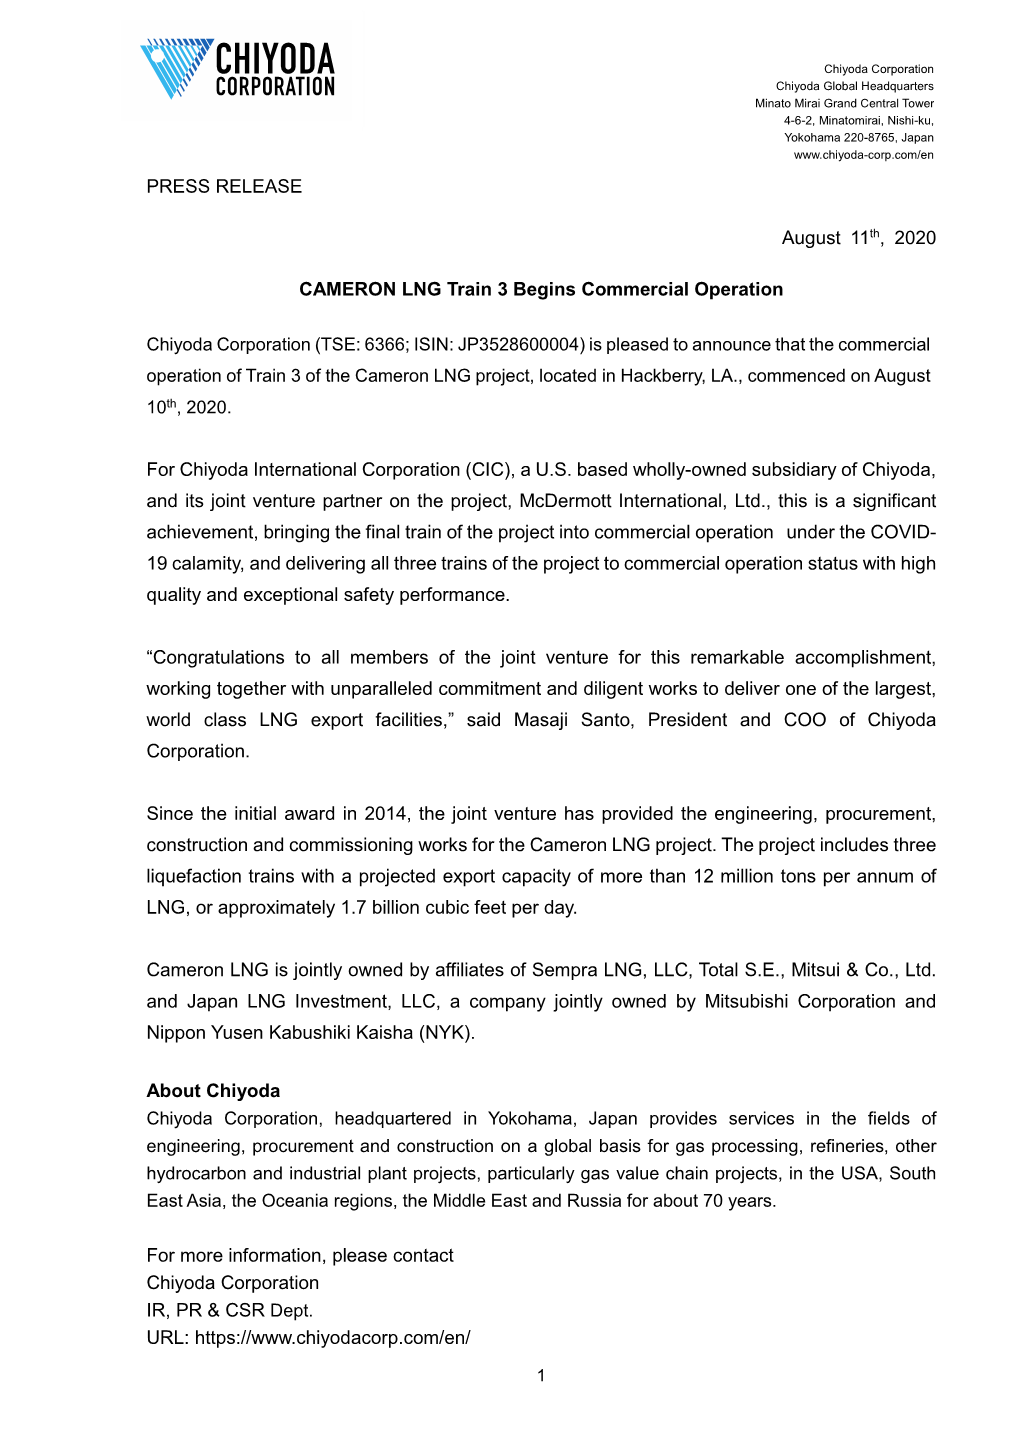 PRESS RELEASE August 11Th, 2020 CAMERON LNG Train 3 Begins